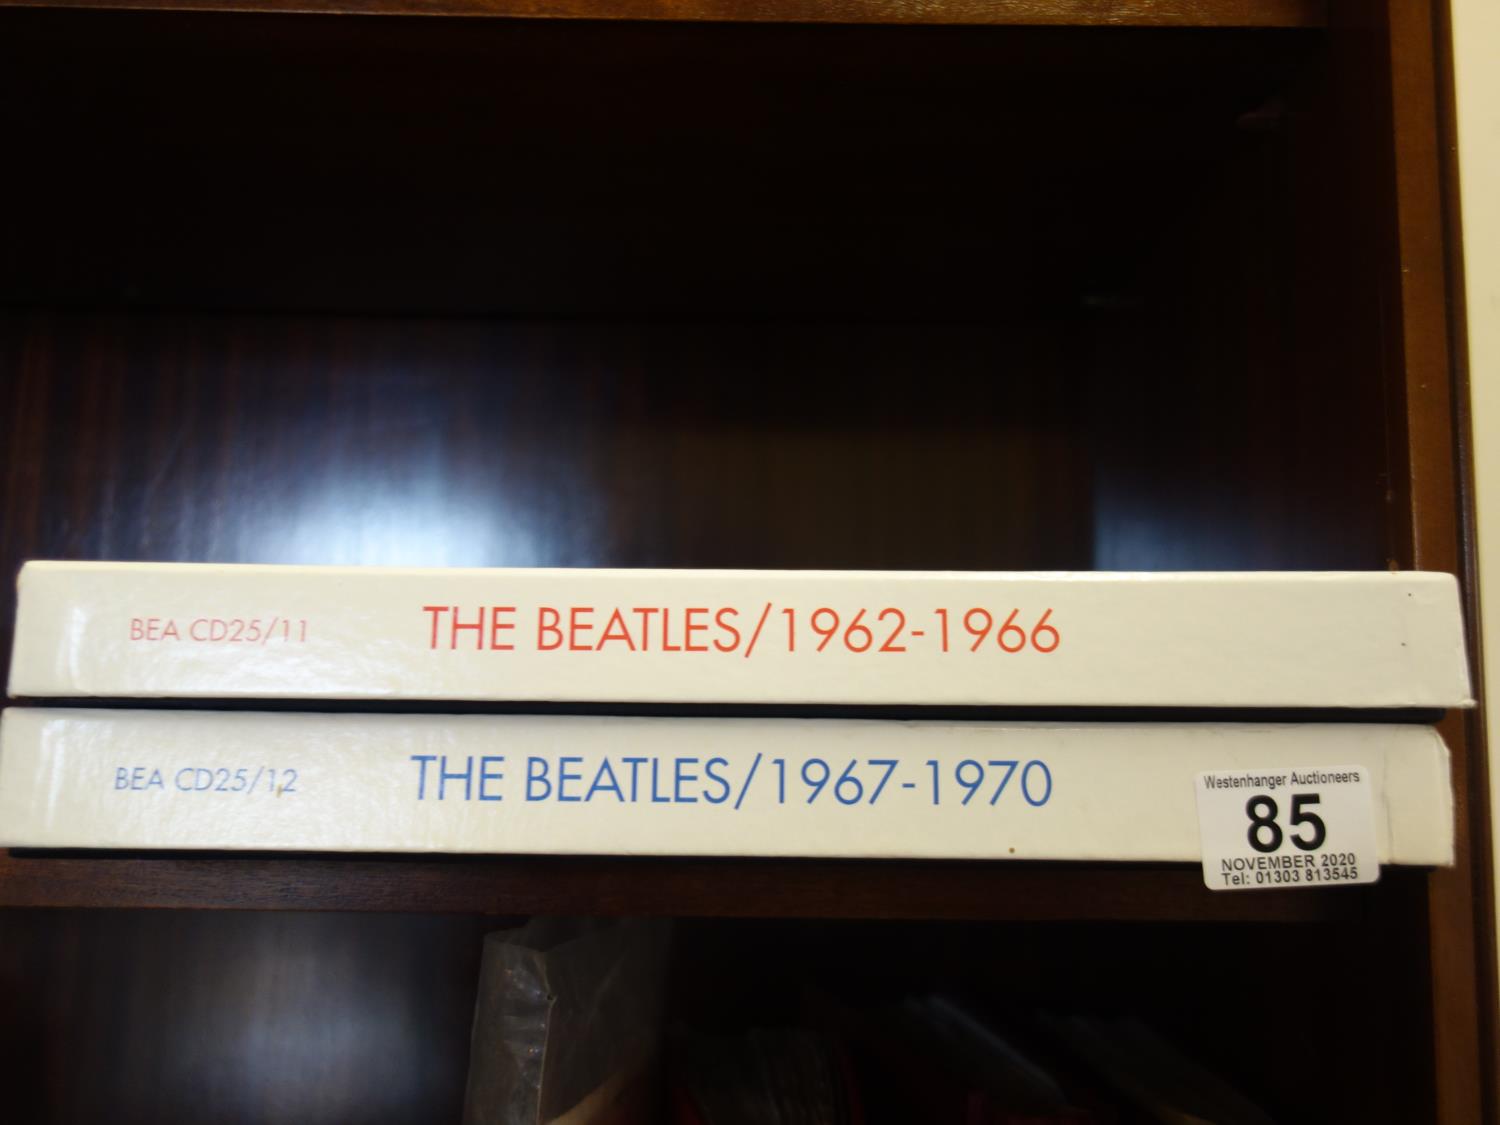 The Beatles 1962-1966-1967-1970, boxed cd set both with original badges limited edition sets - Image 2 of 4